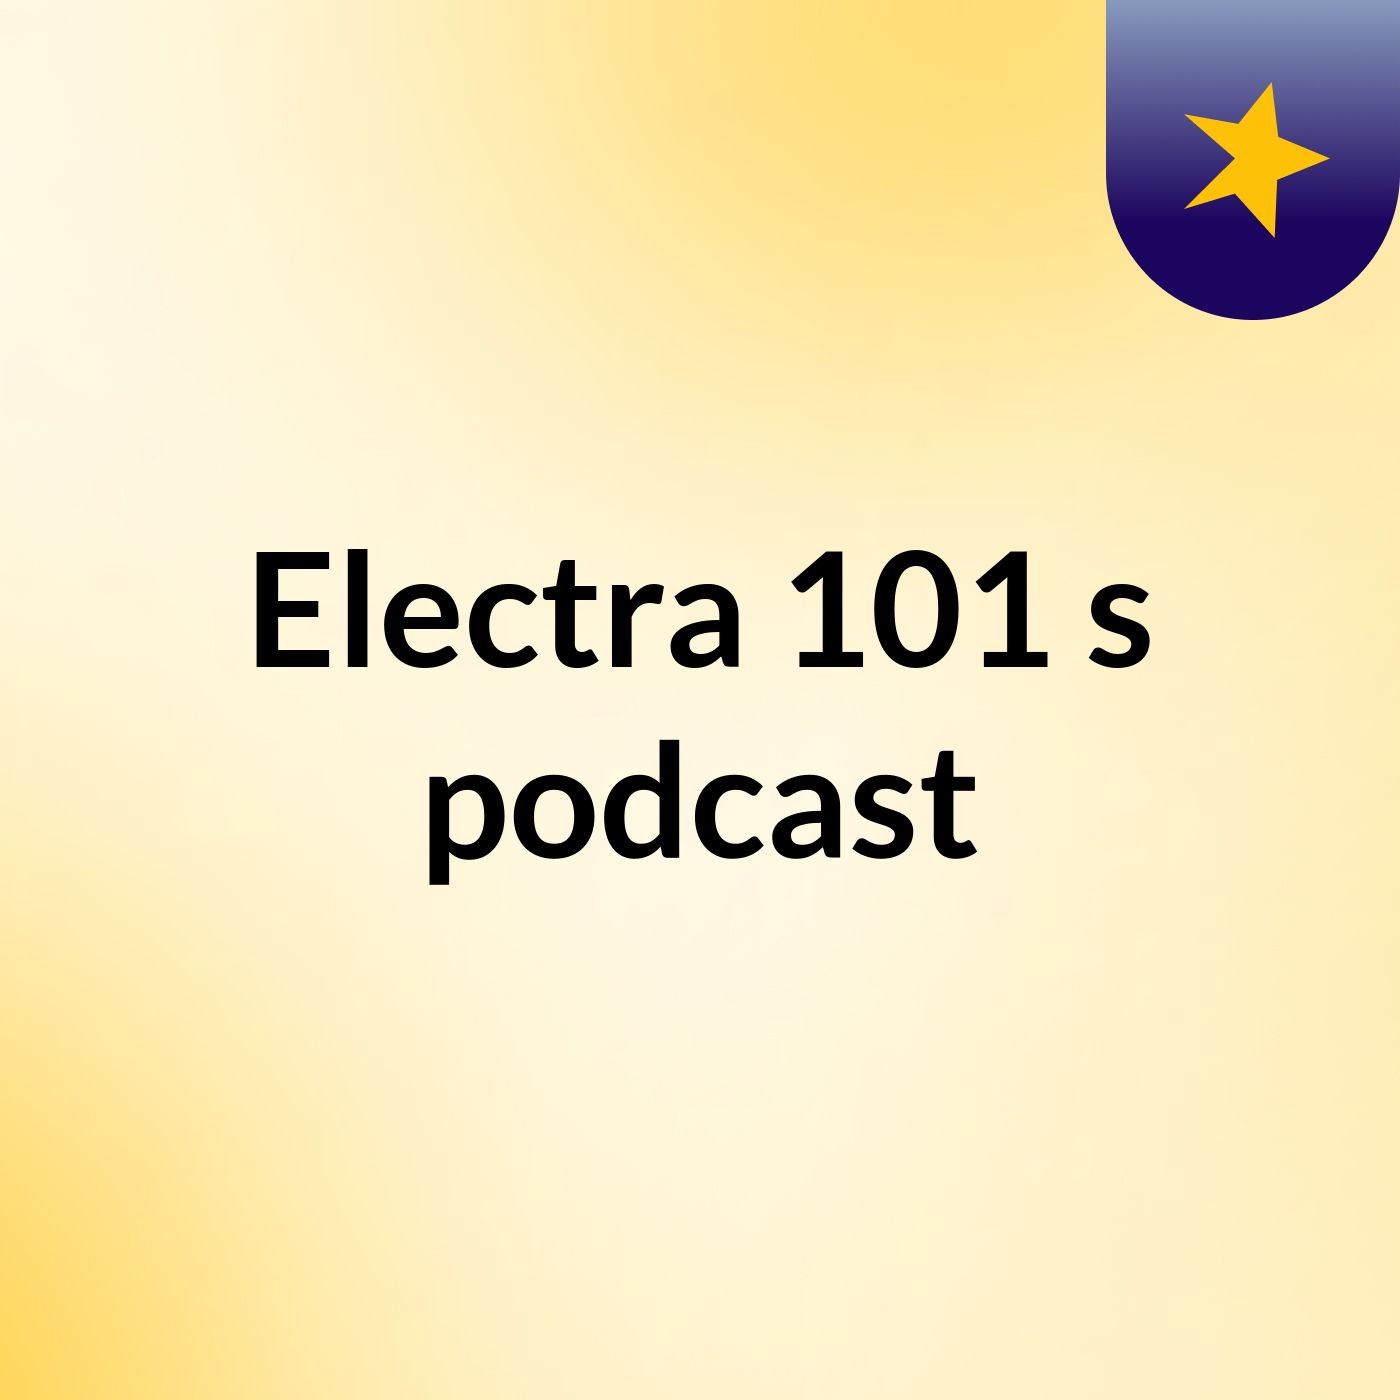 Electra 101's podcast